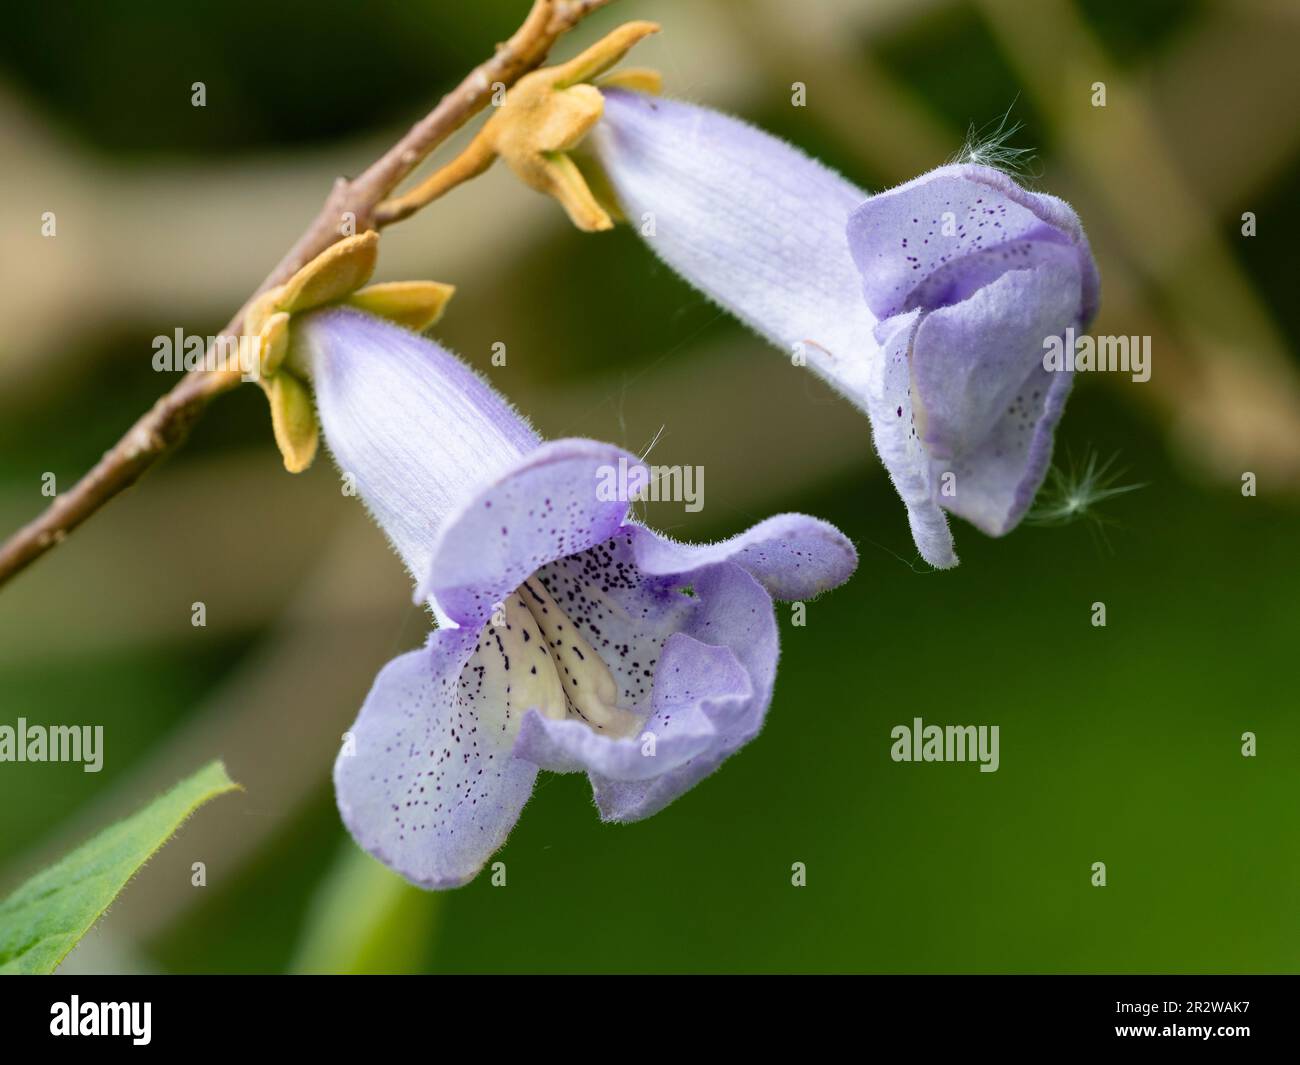 Blue spotted late spring flowers of the fast growing deciduous Sapphire dragon tree, Paulownia kawakamii Stock Photo